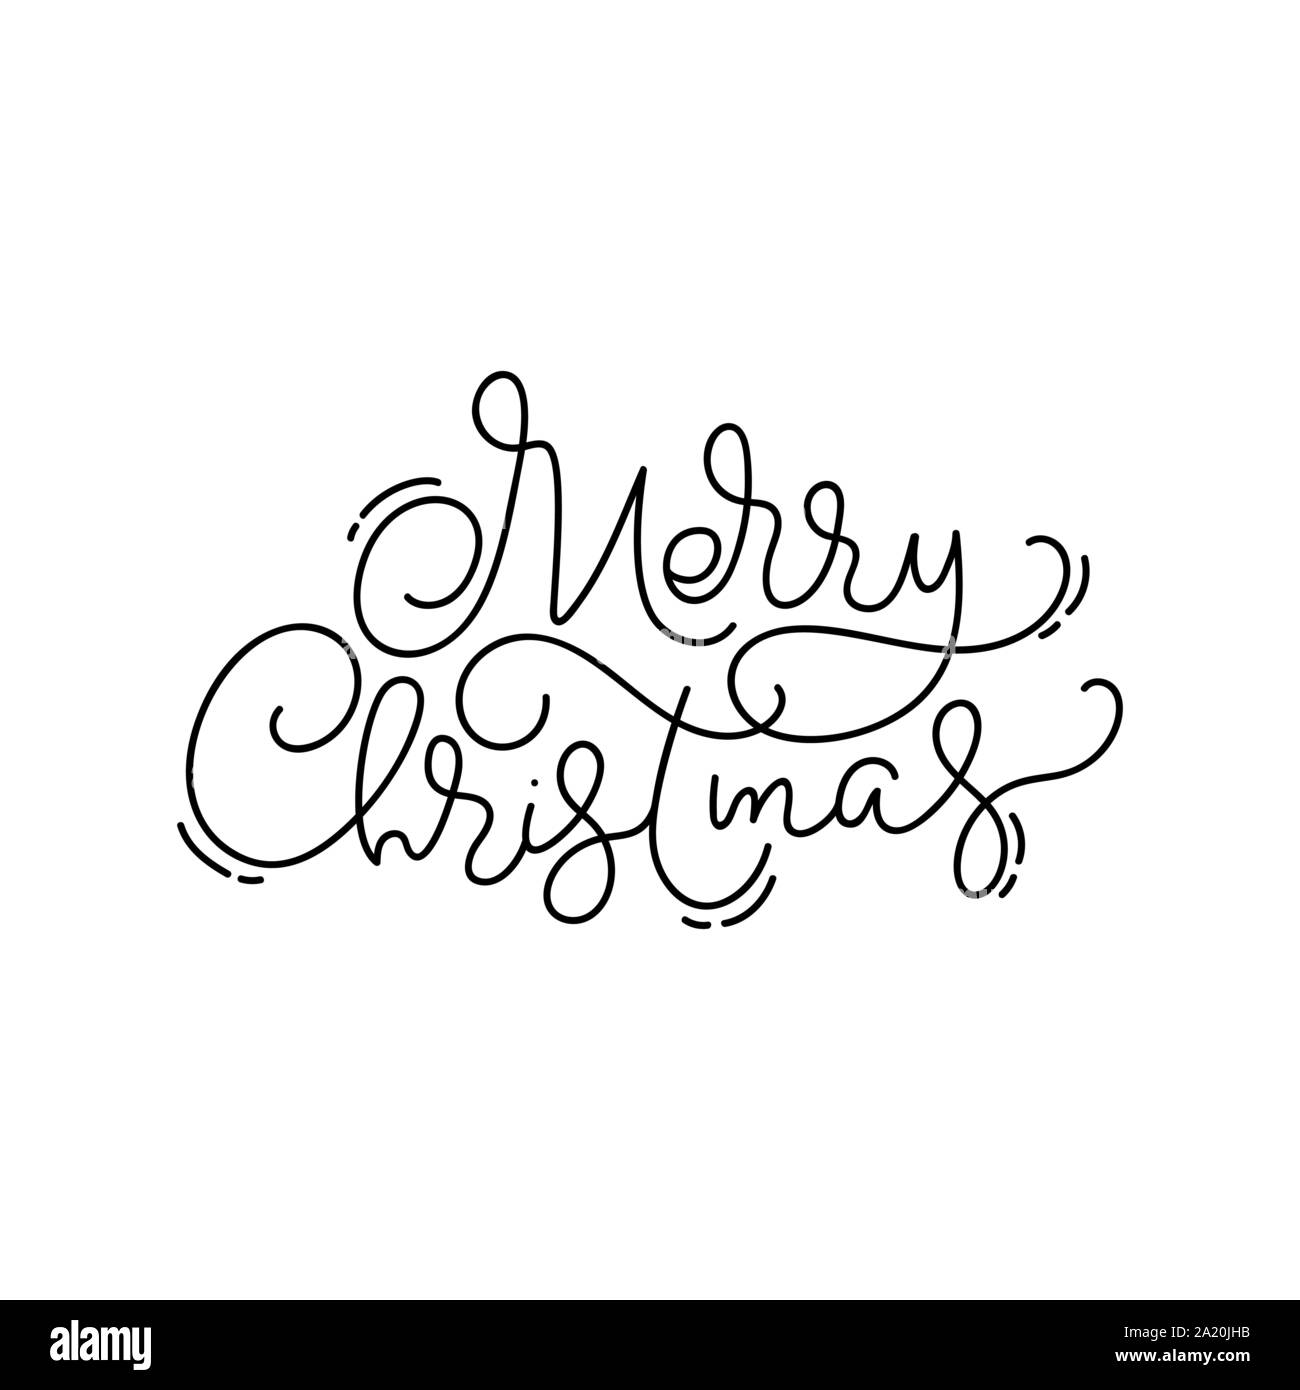 Merry Christmas calligraphic hand written monoline text. Xmas holidays lettering for greeting card, poster, modern winter season postcard, brochure Stock Vector